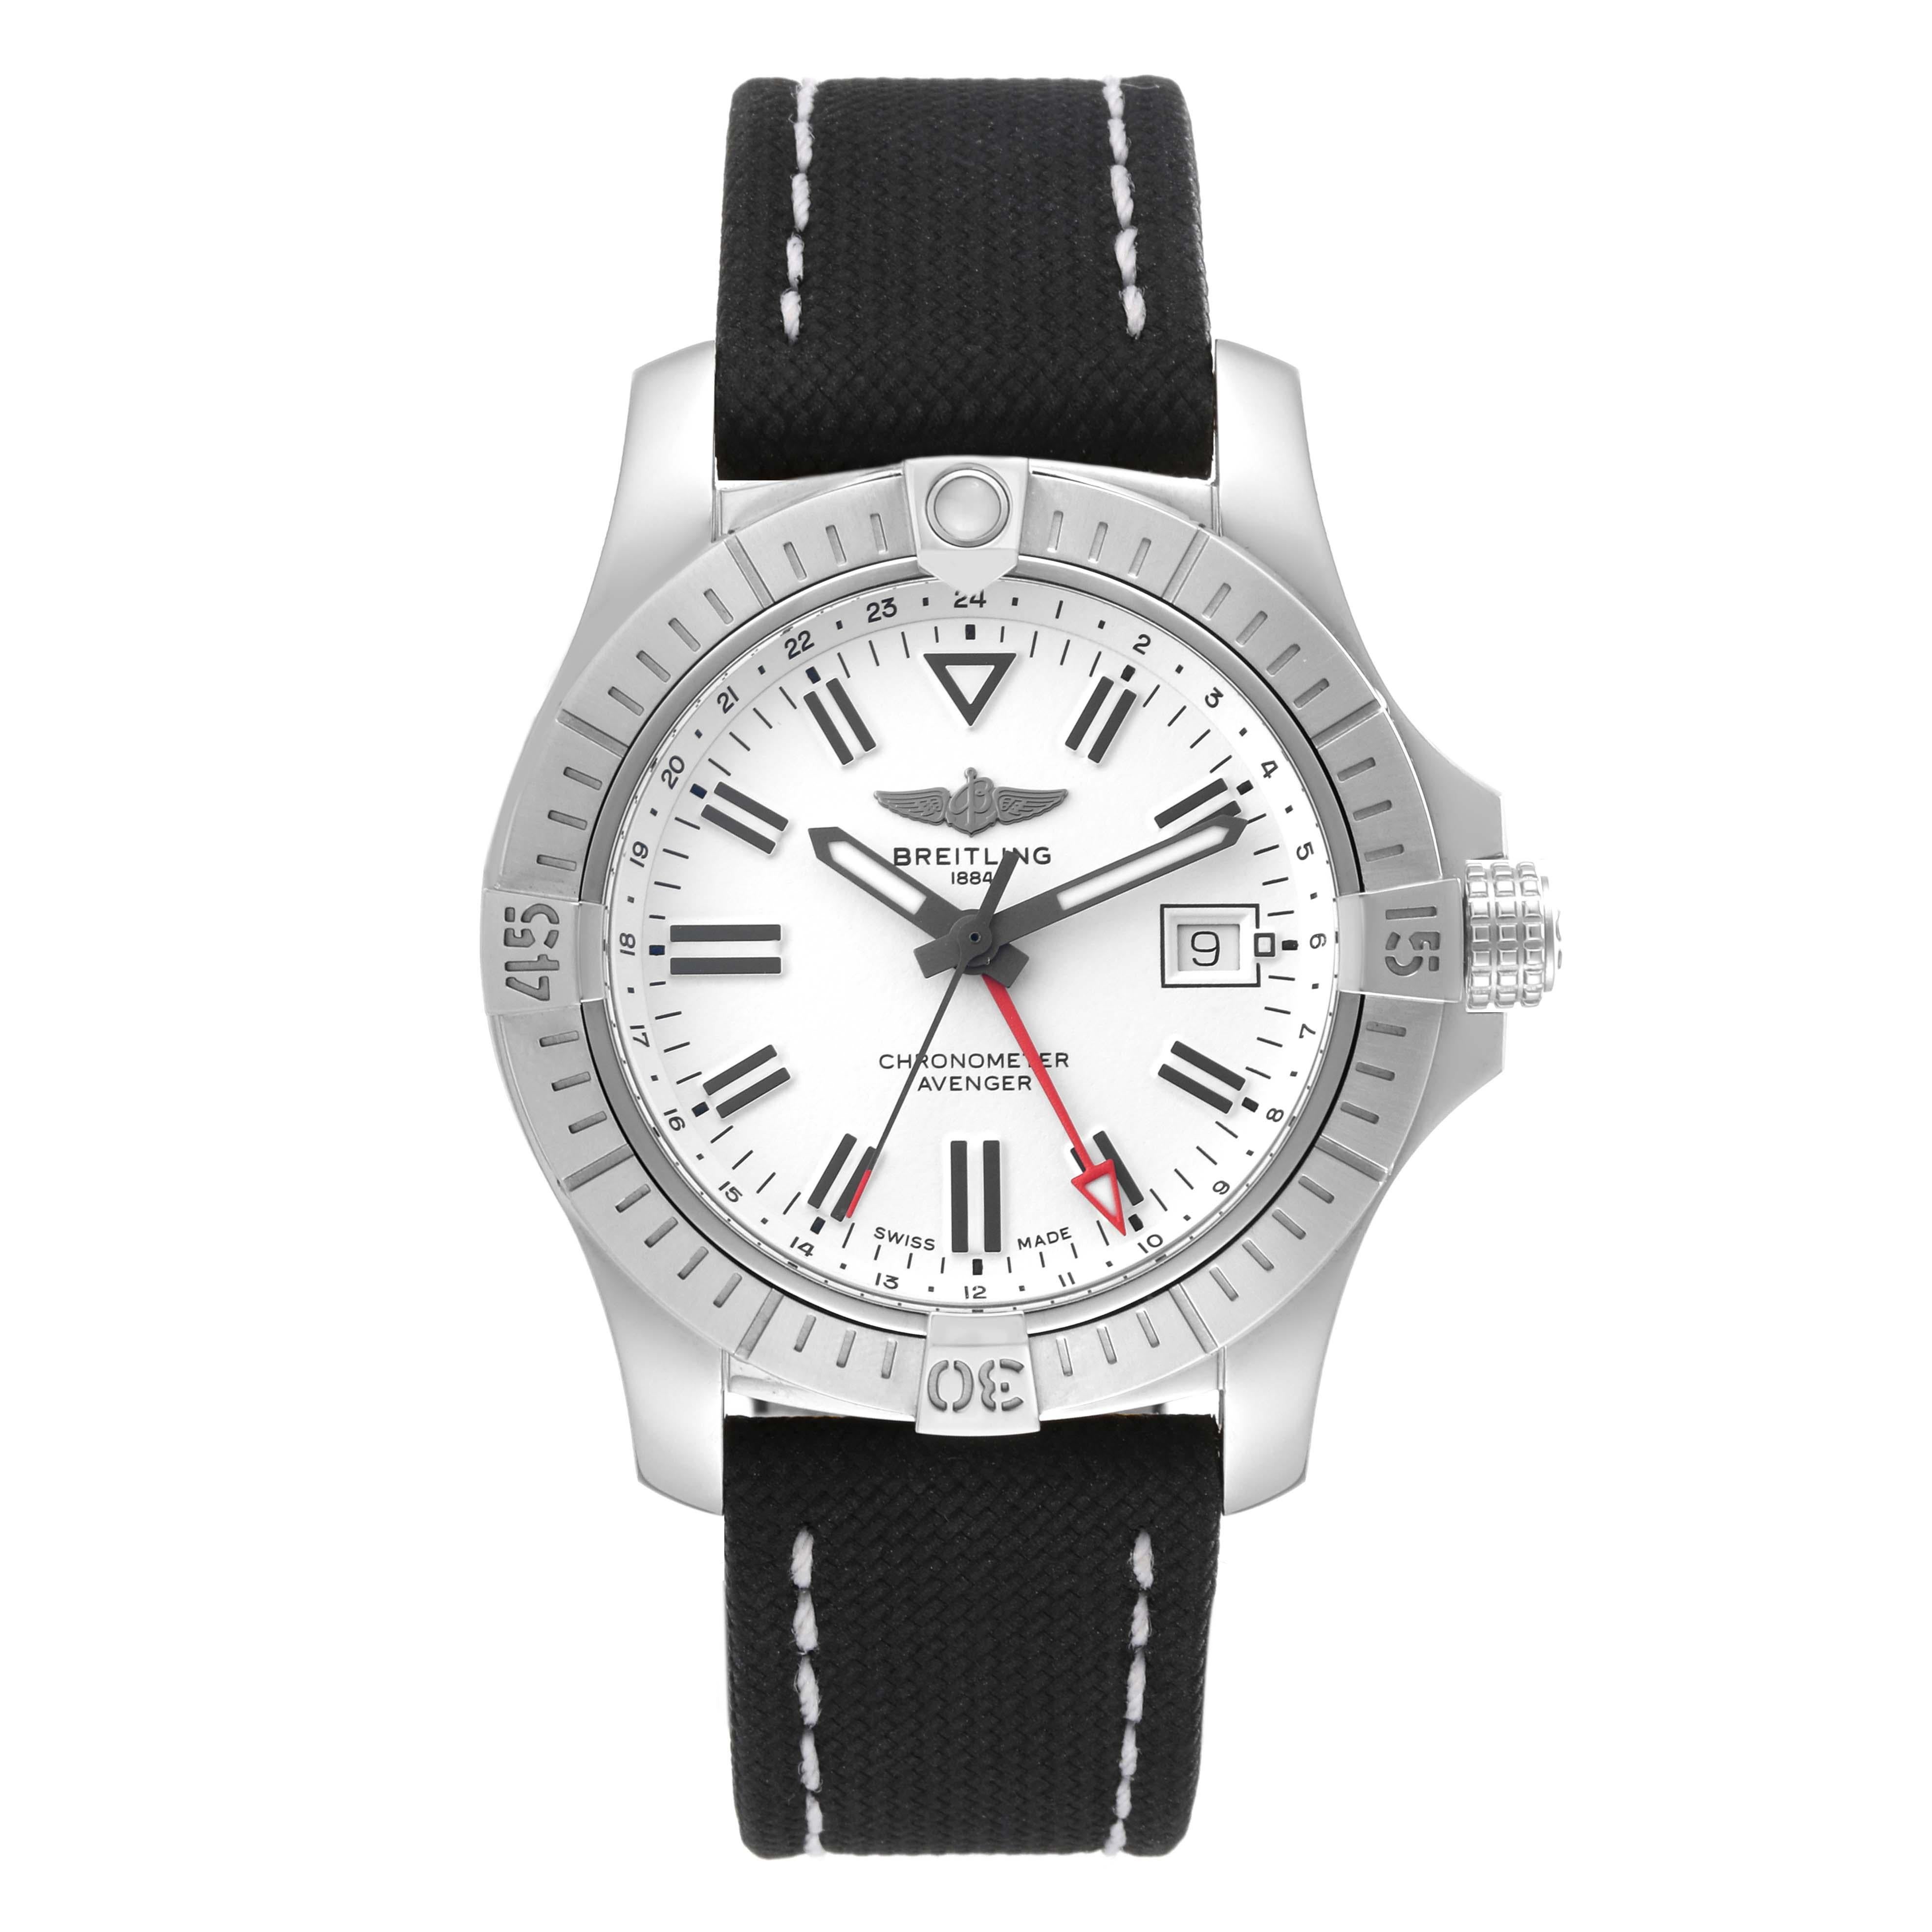 Breitling Chronomat GMT White Dial Steel Mens Watch A32397 Box Card. Self-winding automatic officially certified chronometer movement. Stainless steel case 43.0 mm in diameter with screwed-down crown. Stainless steel unidirectional rotating bezel.